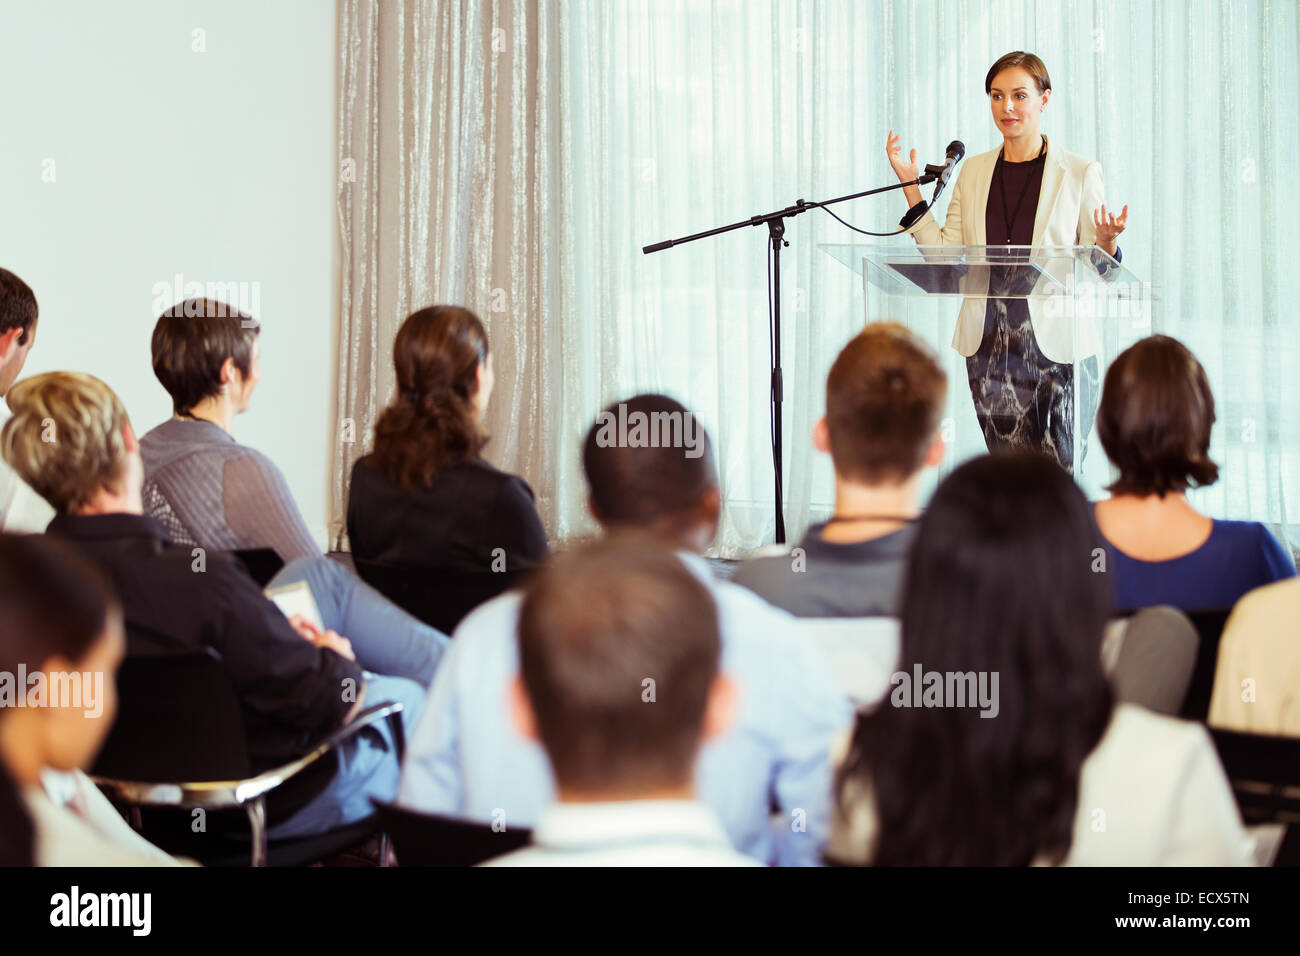 Businesswoman giving presentation in conference room Stock Photo